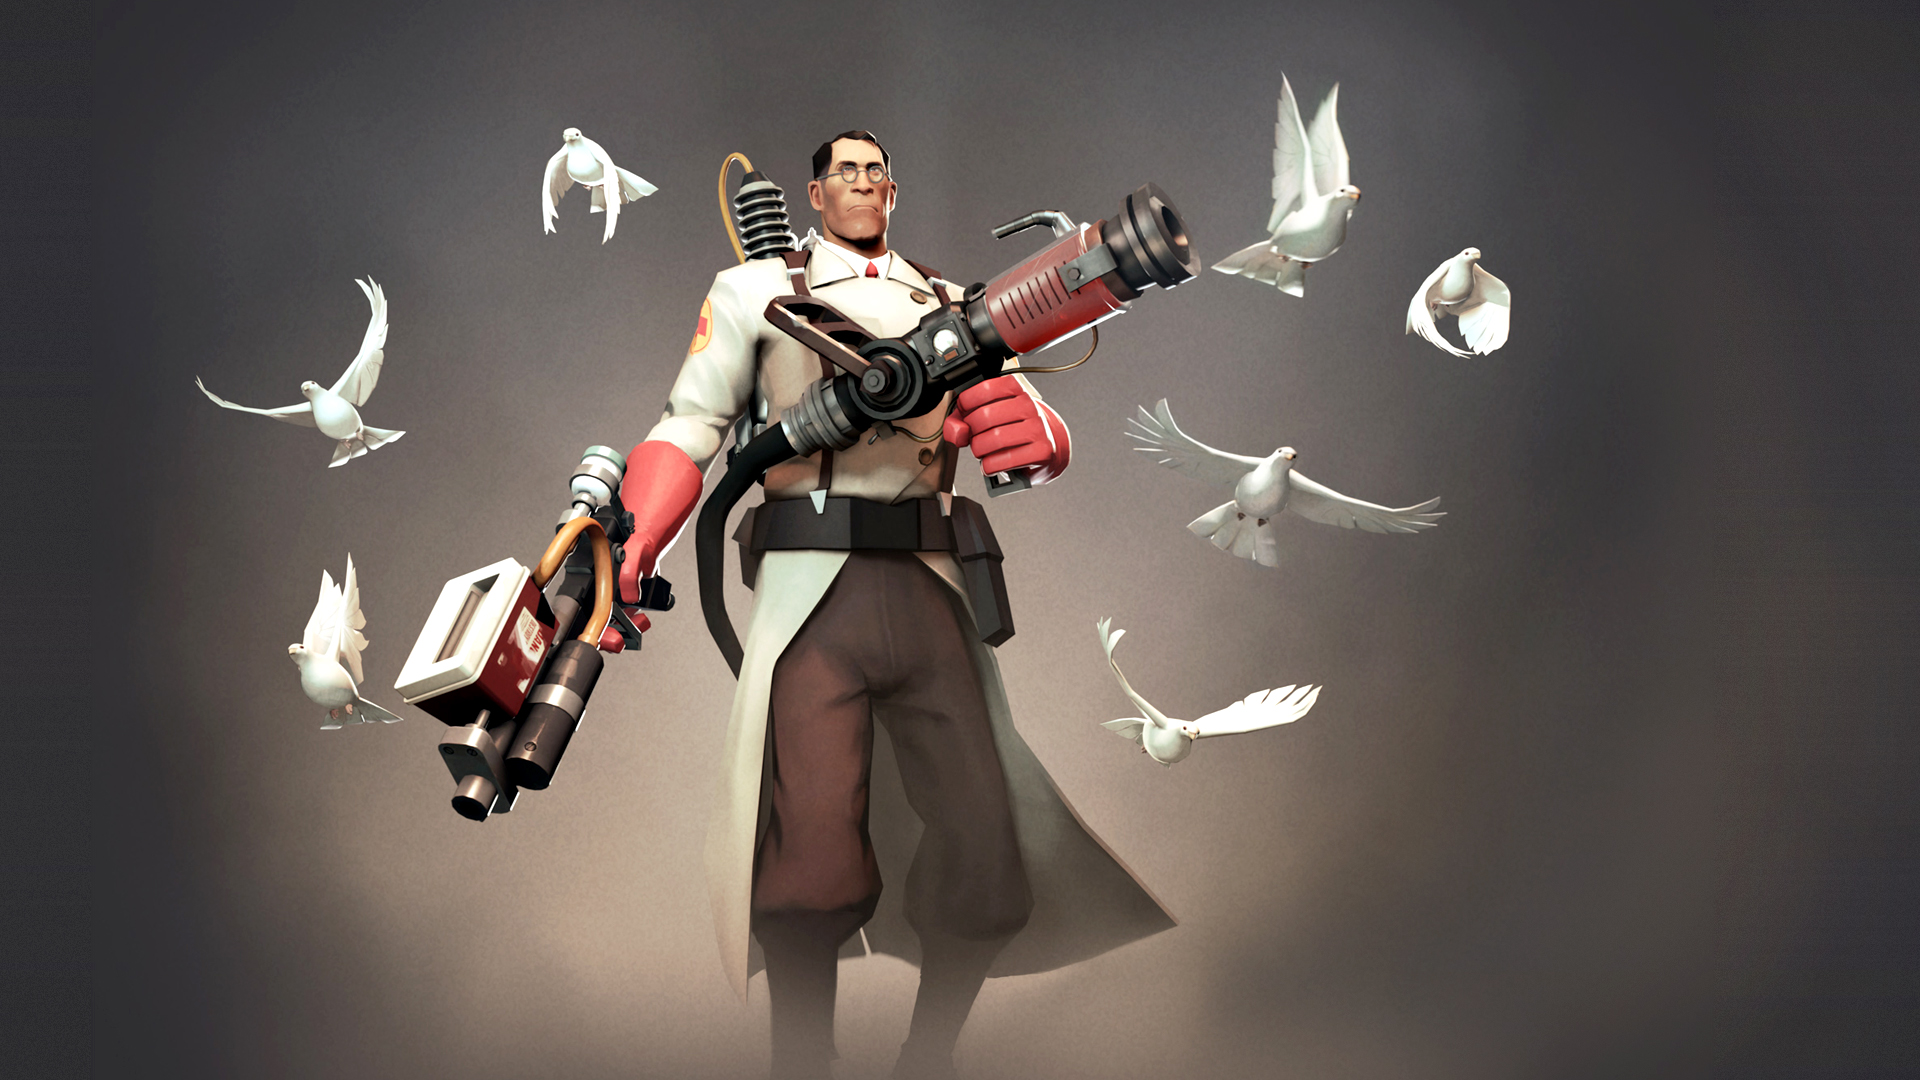 Engineer Tf2 Pyro Tf2 Team Fortress 2 Wallpaper , HD Wallpaper & Backgrounds